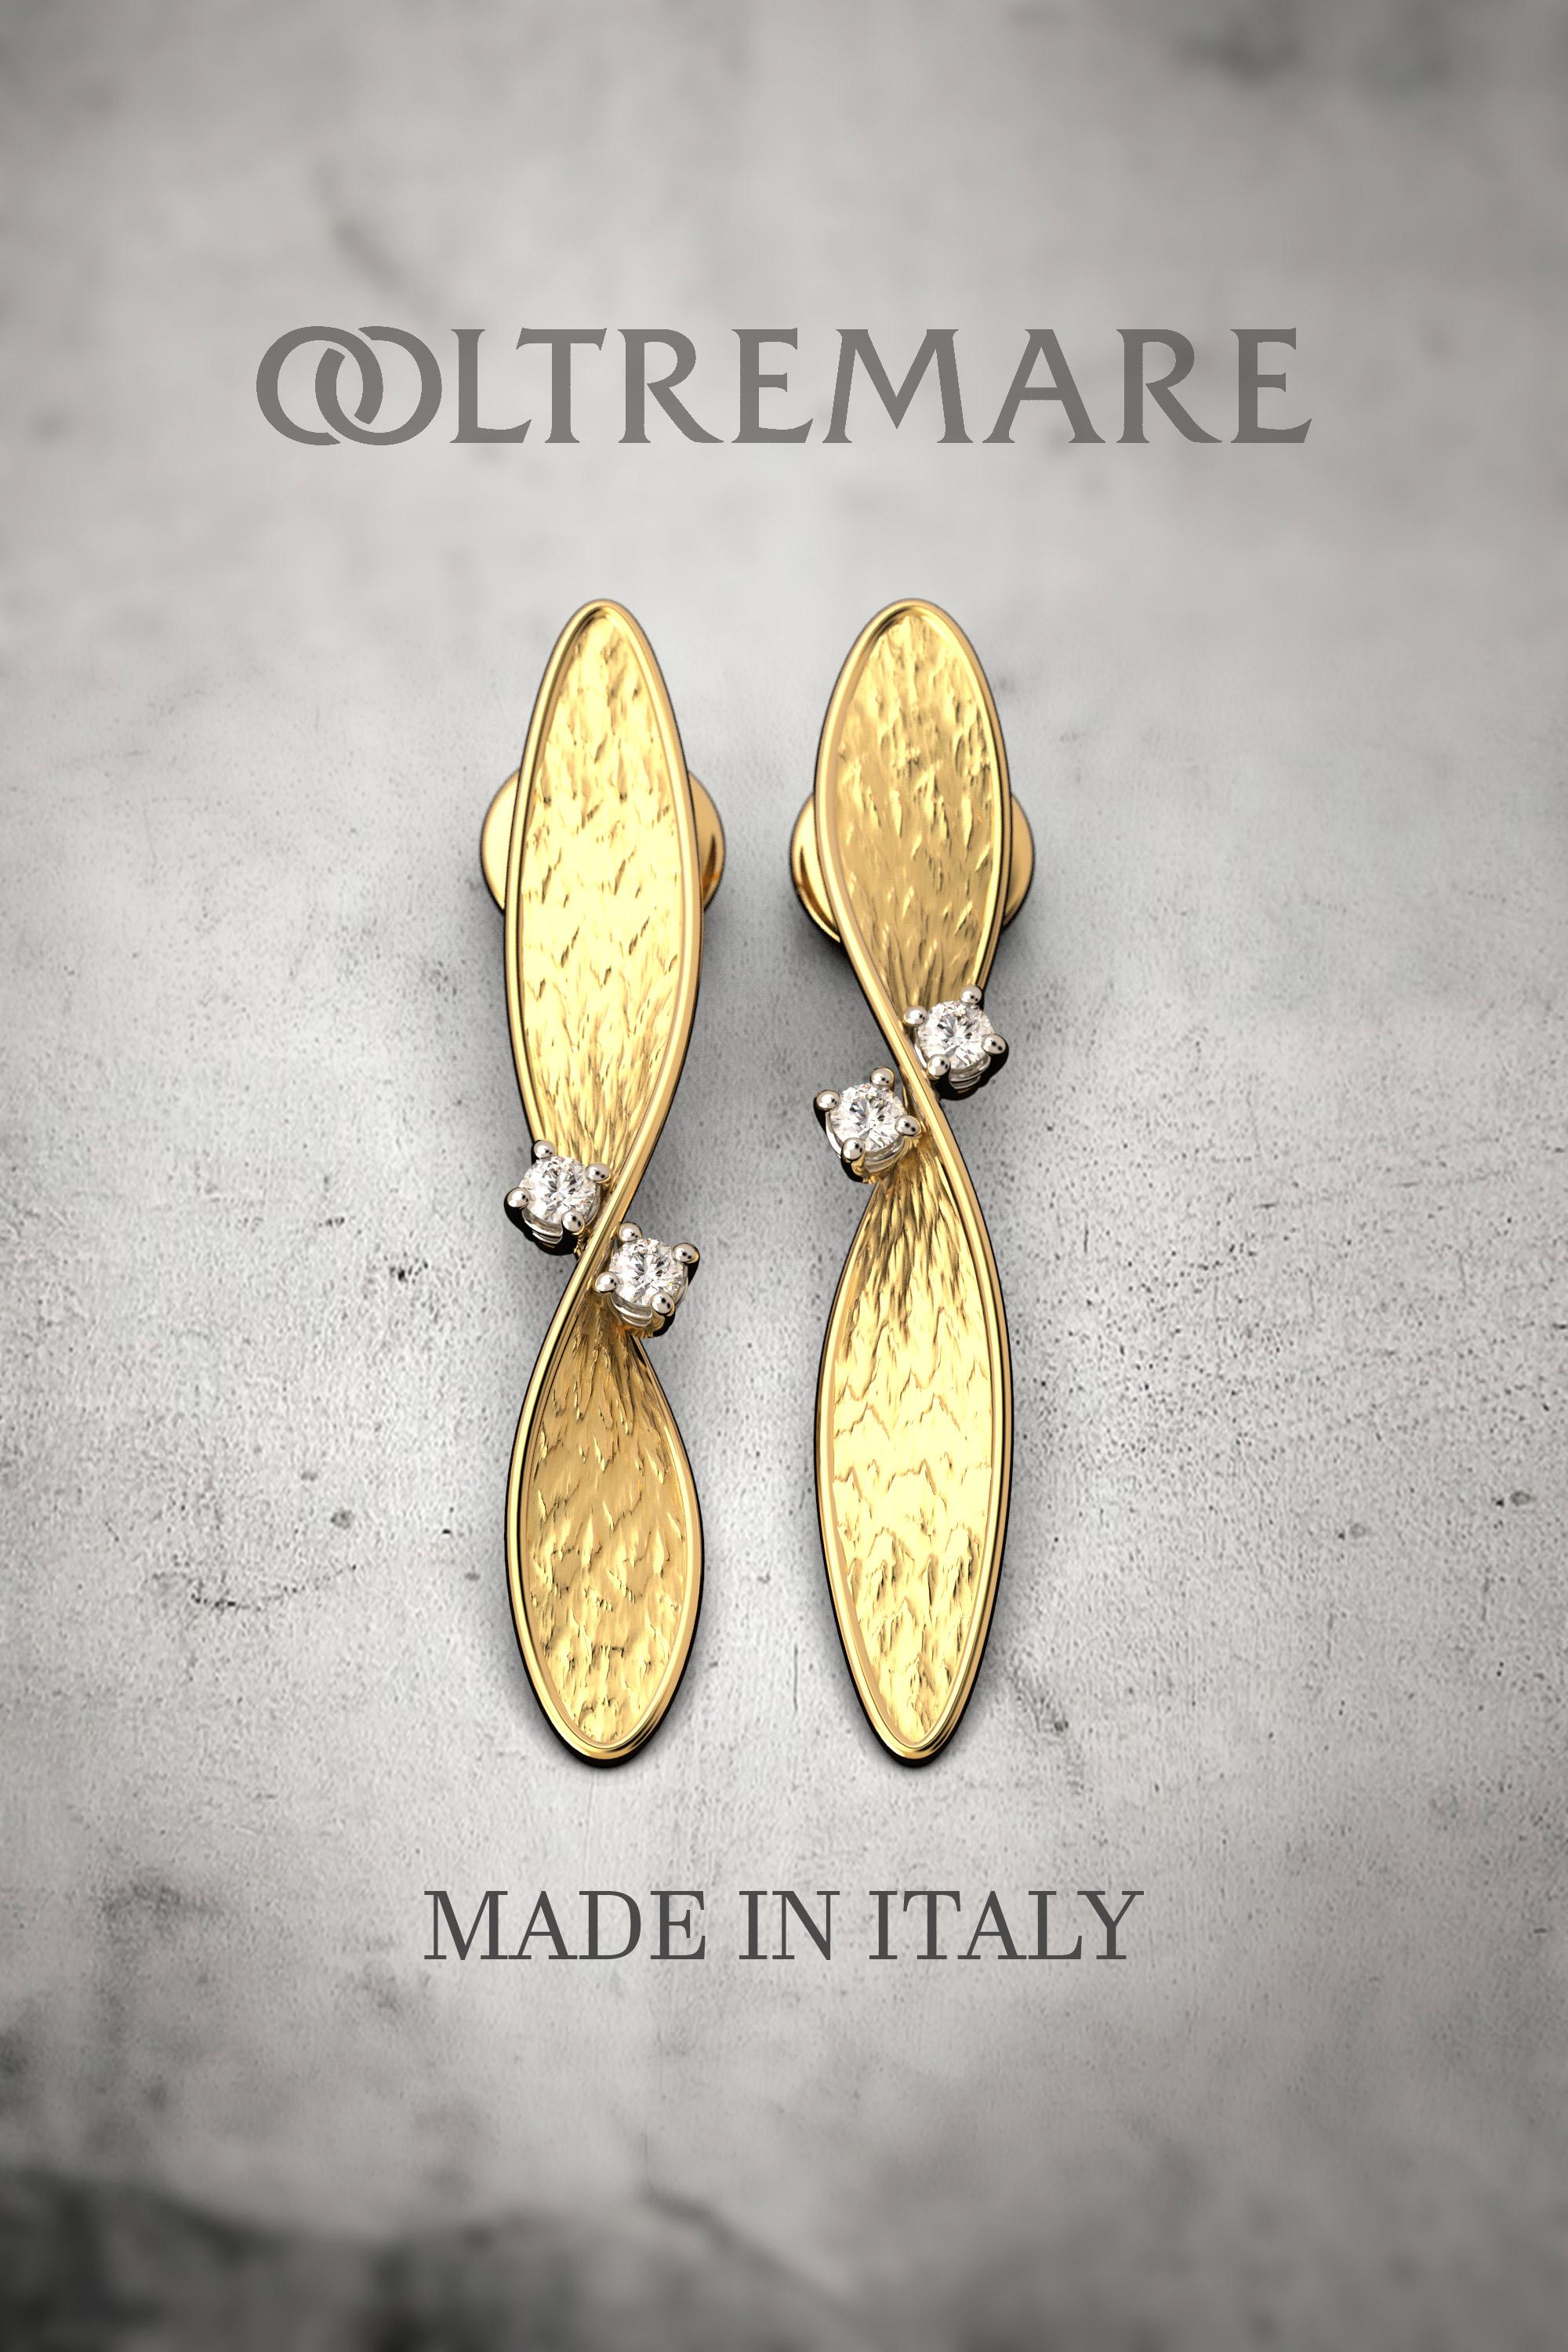 Modern Asymmetrical Gold Stud Earrings with natural diamonds
The jewels of the Polvere collection are born from a material idea in which modern and fluid surfaces are covered with gold dust, play with the raw and powdery brightness of the rocks and